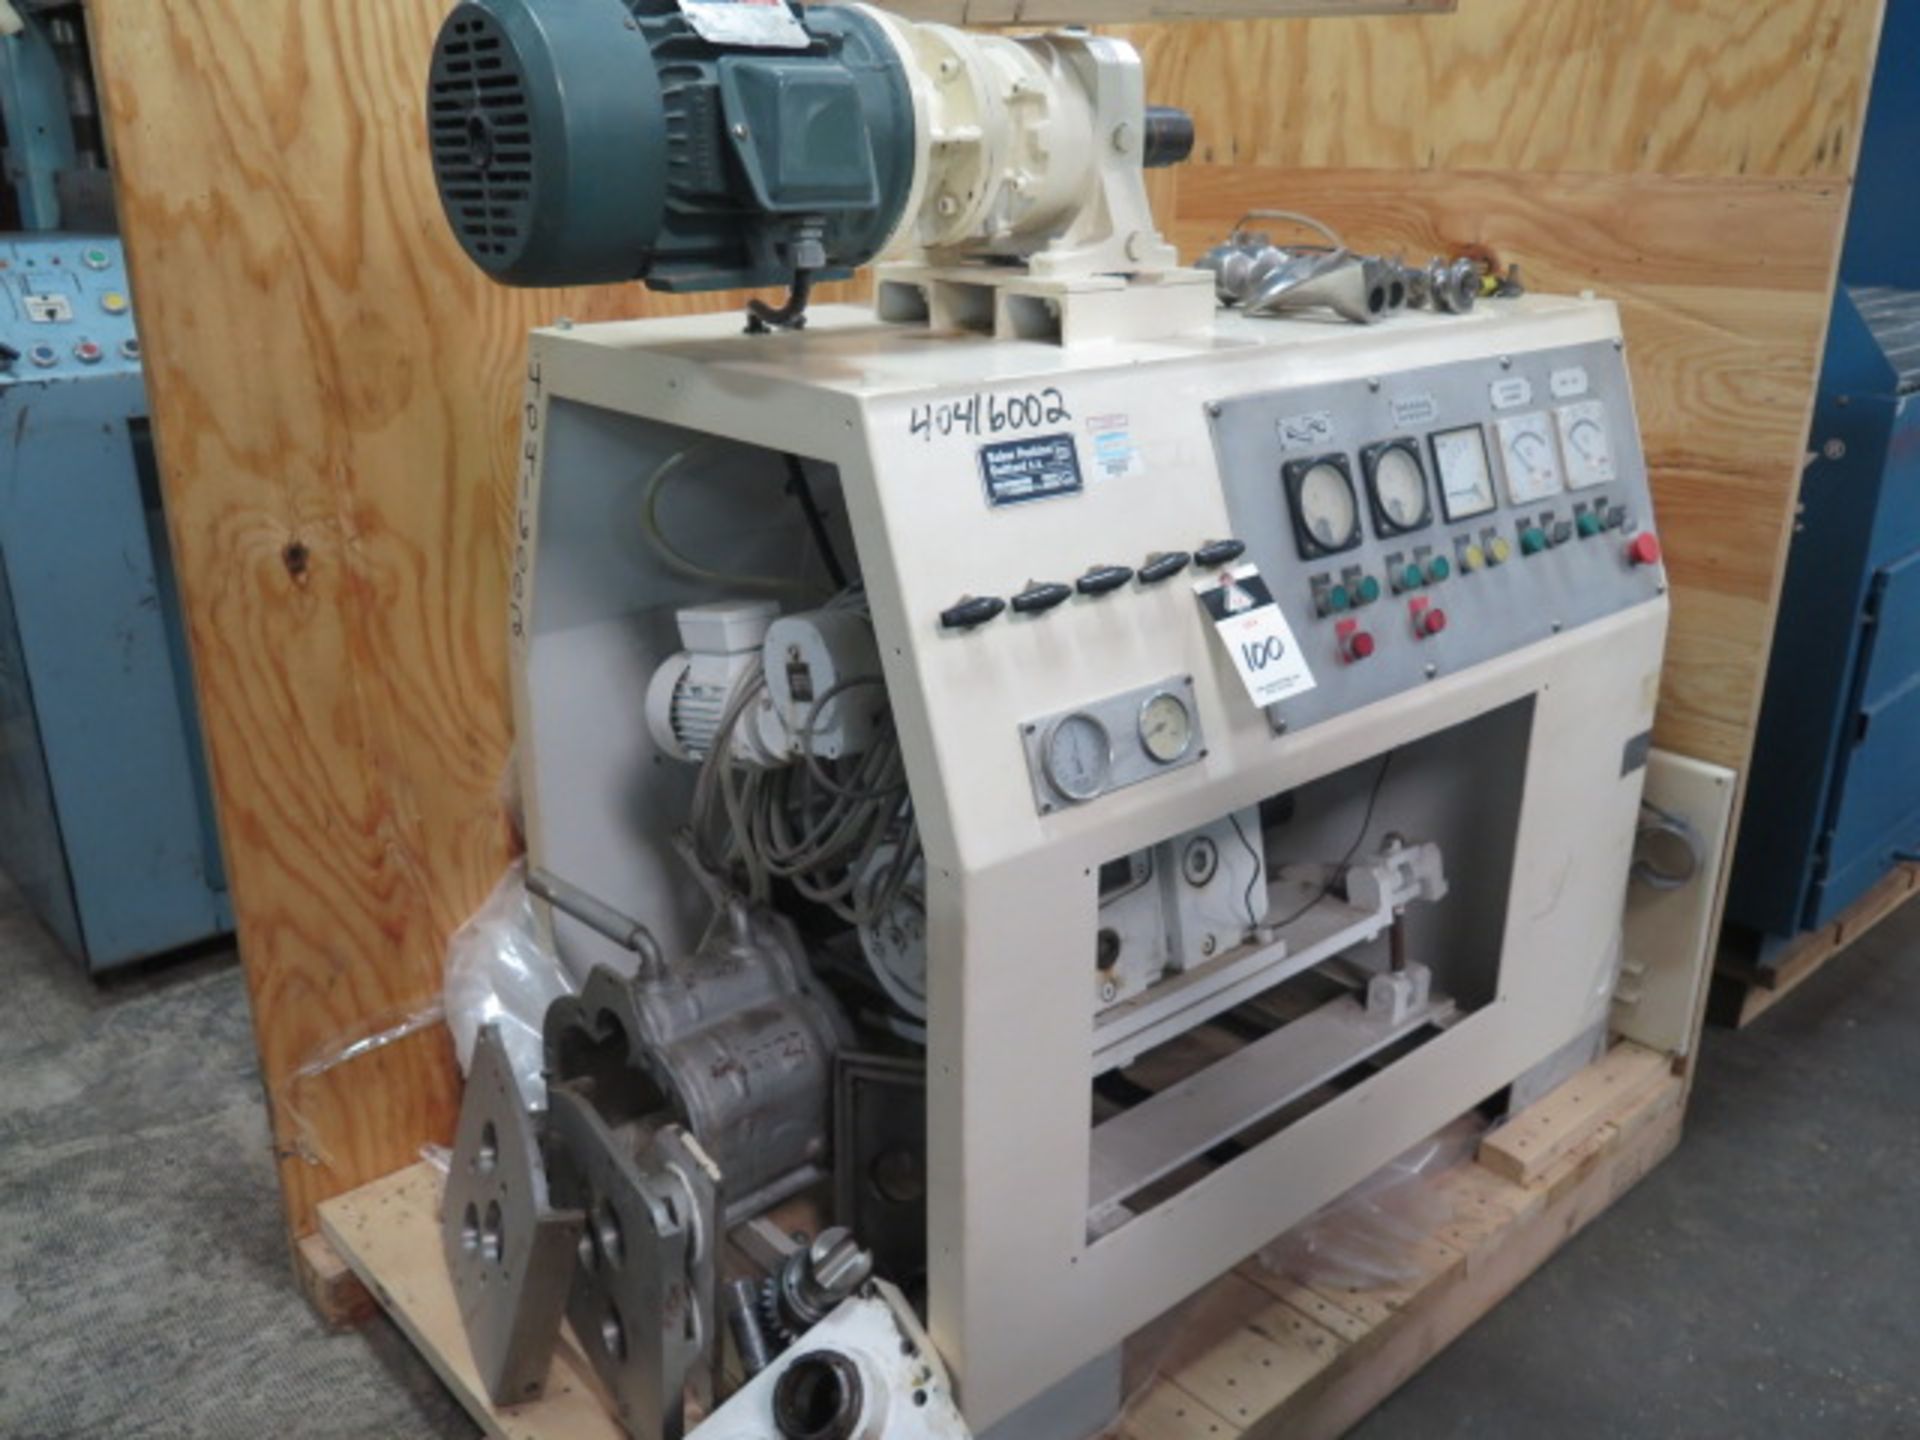 Barker Perkins LEX8 Mixer Extruder s/n 3572 (SOLD AS-IS - NO WARRANTY) - Image 2 of 10